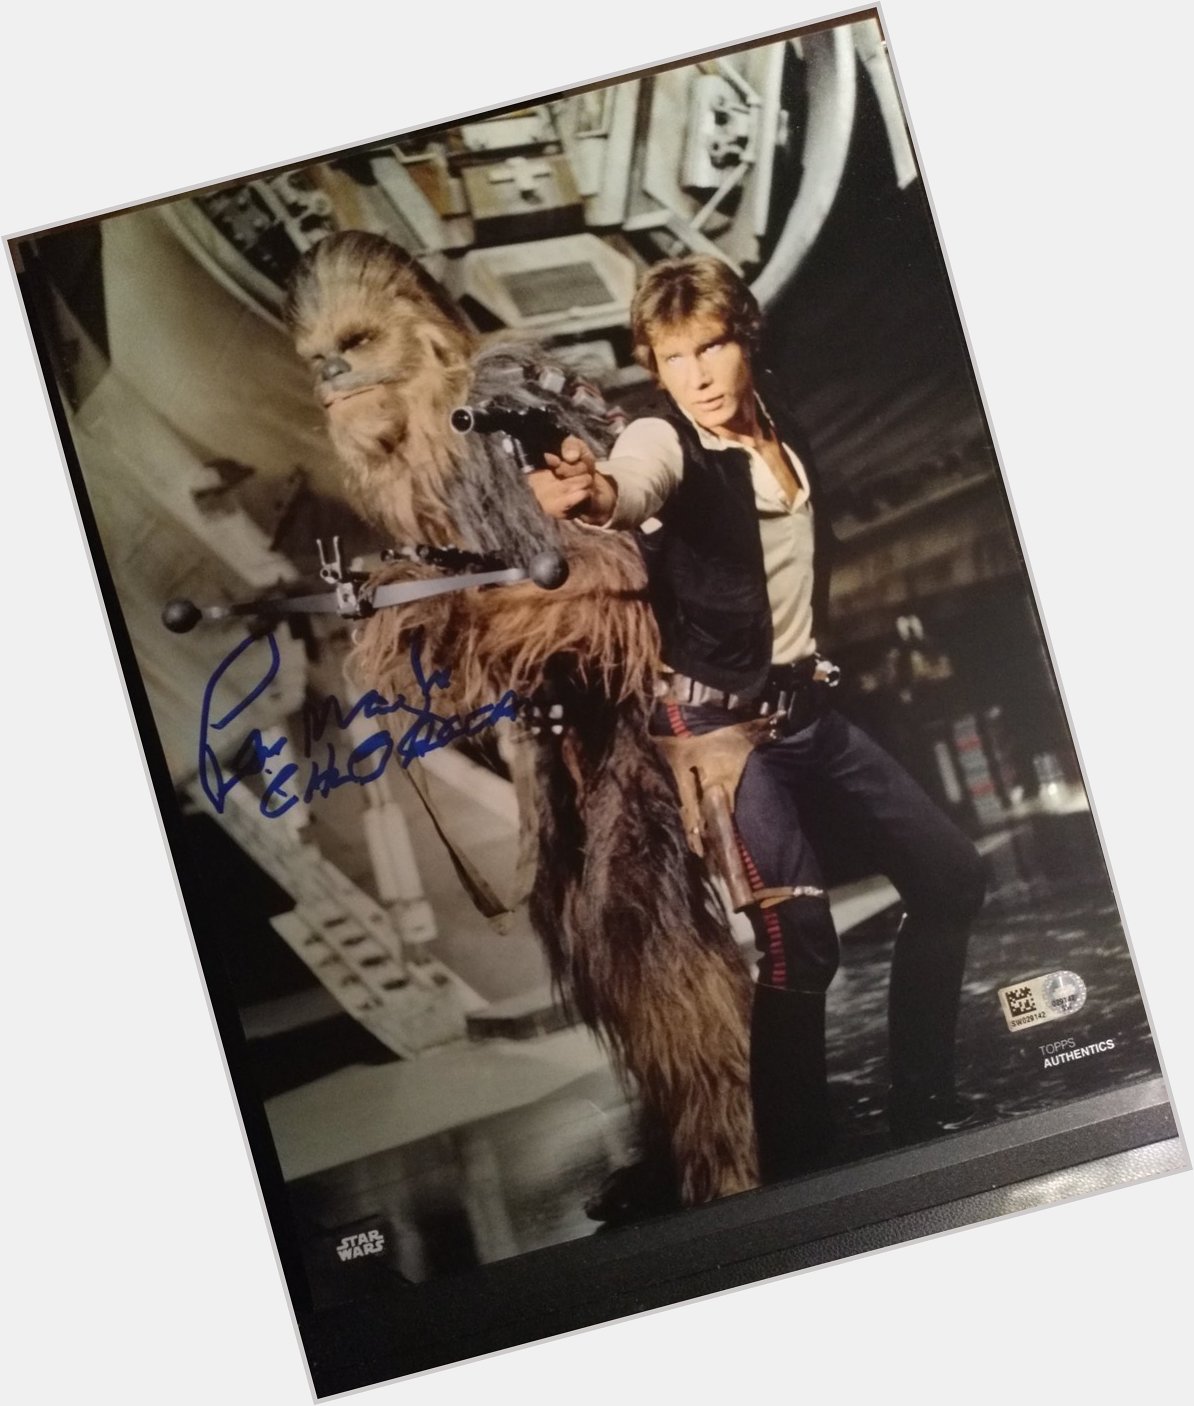 Happy birthday to the only one Chewbacca, Peter Mayhew ! It was a pleasure to met you at the 